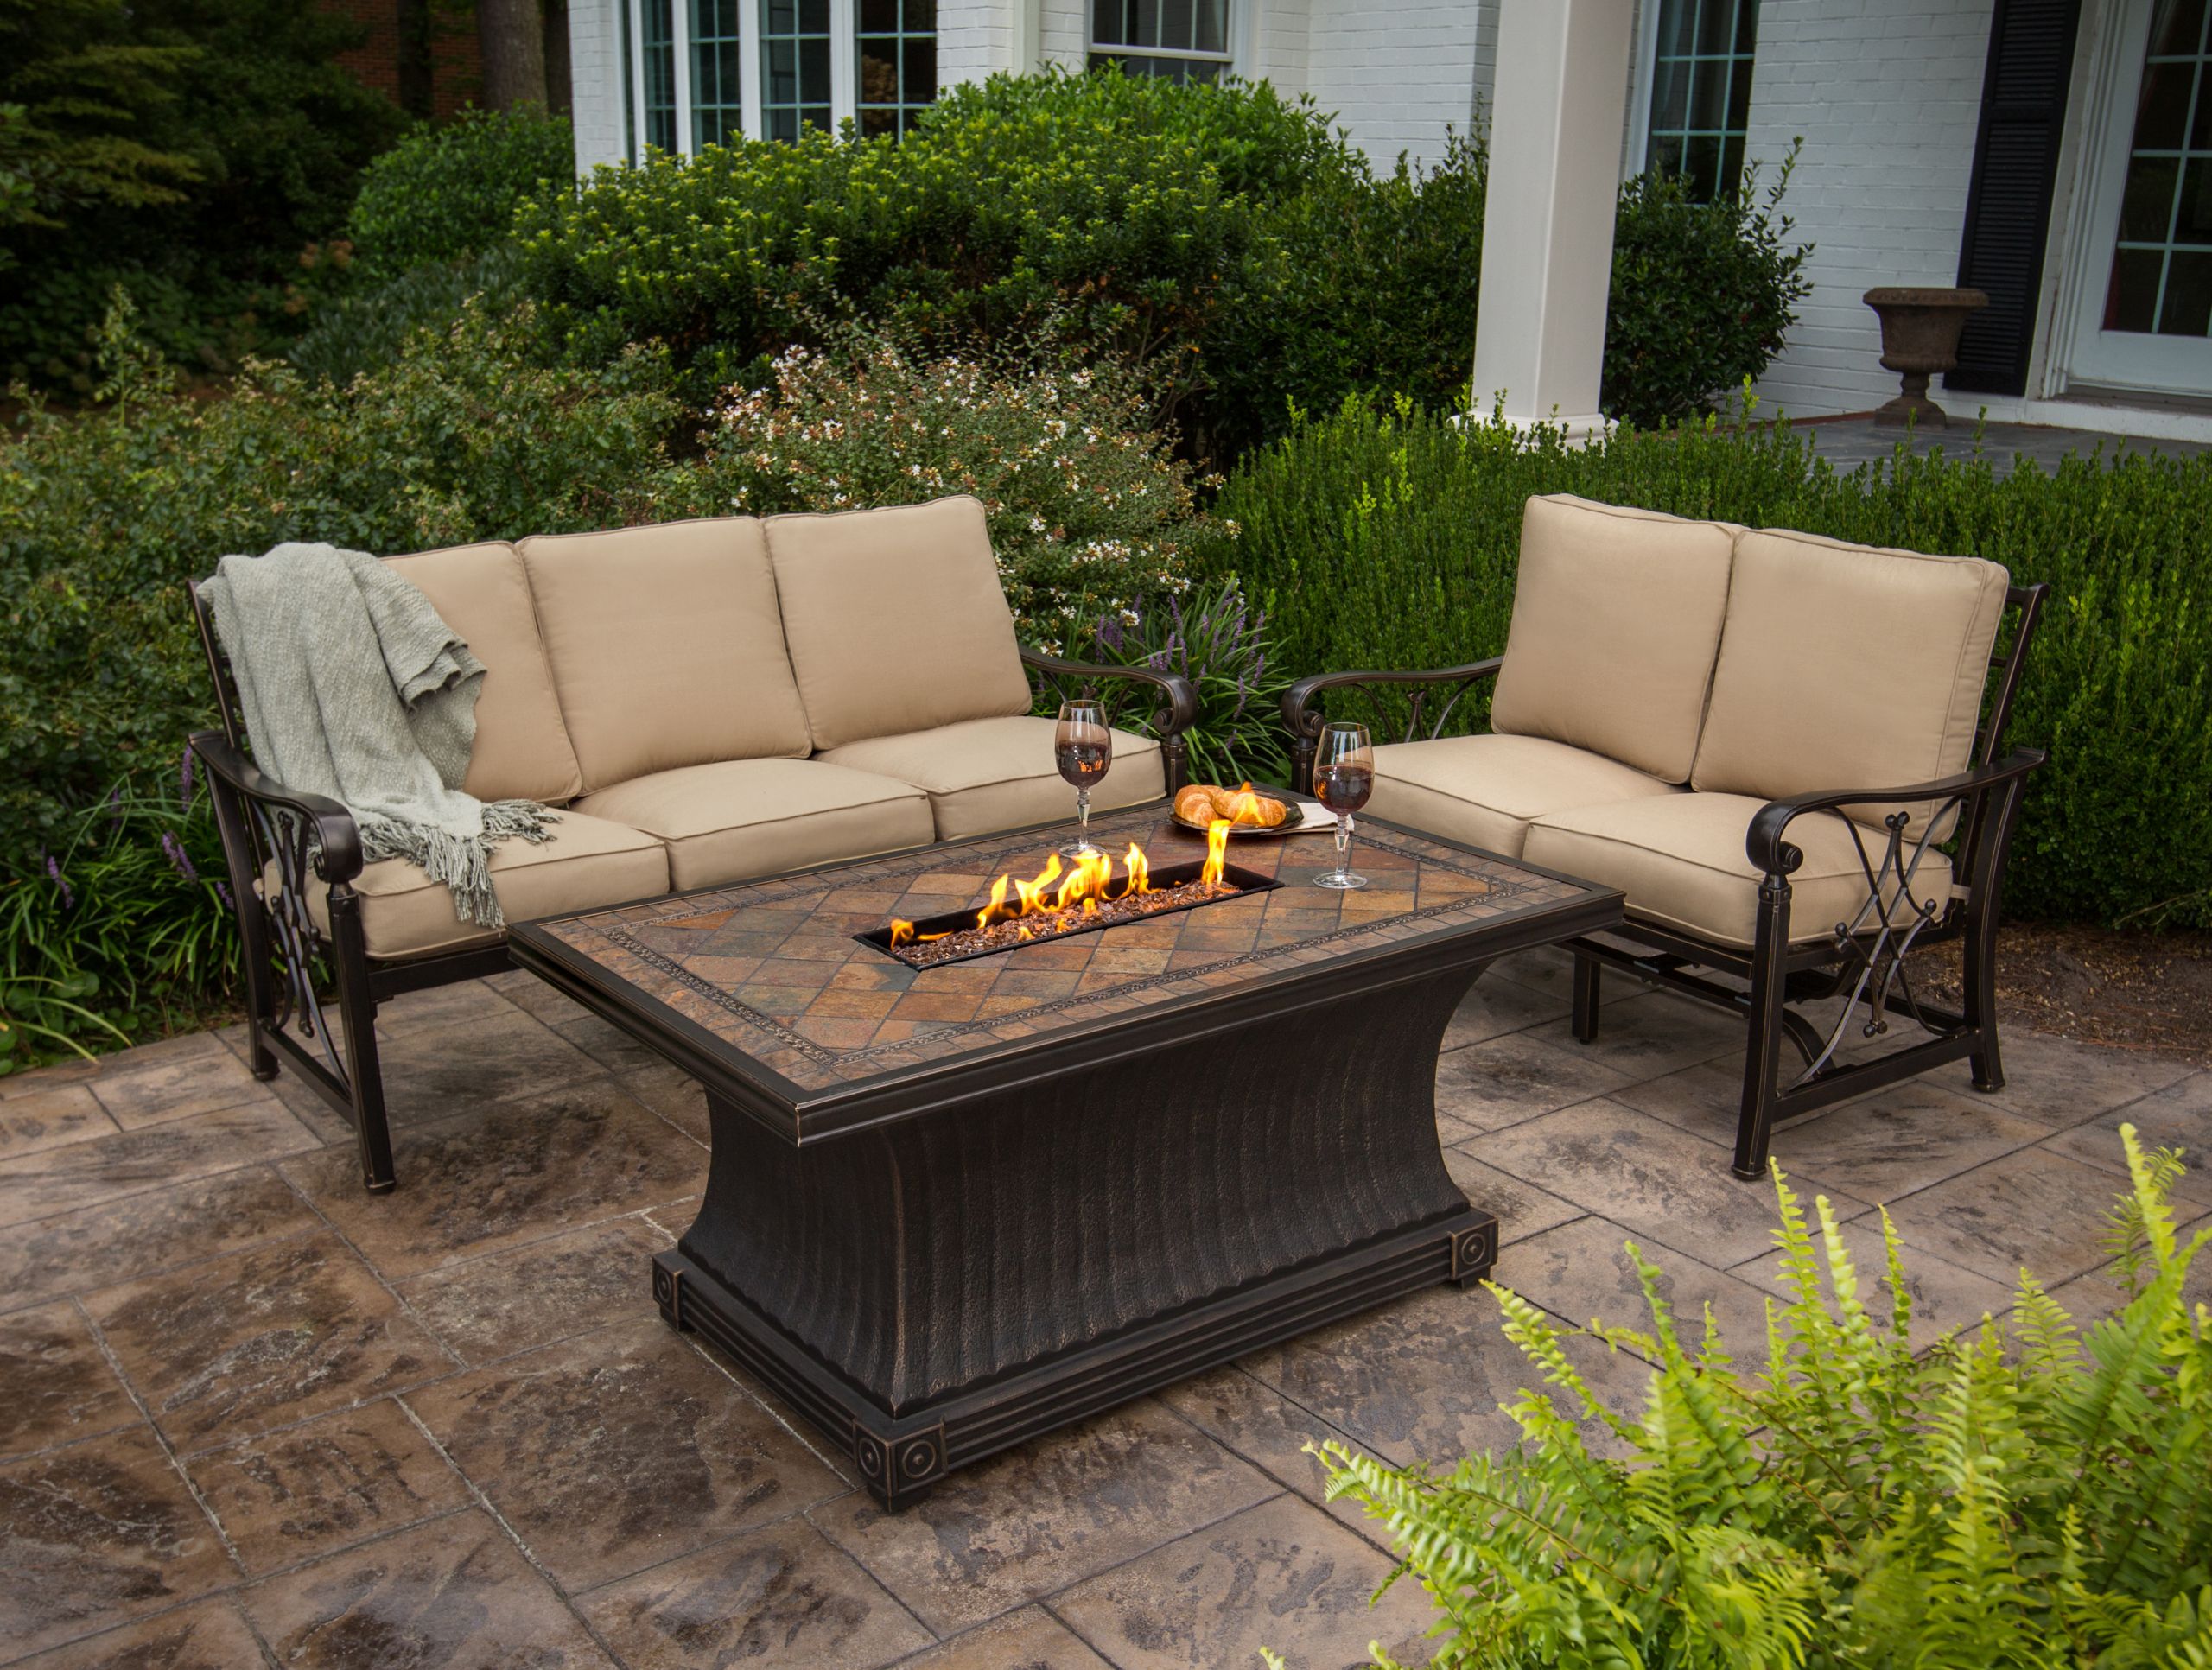 Patio Table With Fire Pit
 Fire Tables & Fire Pits